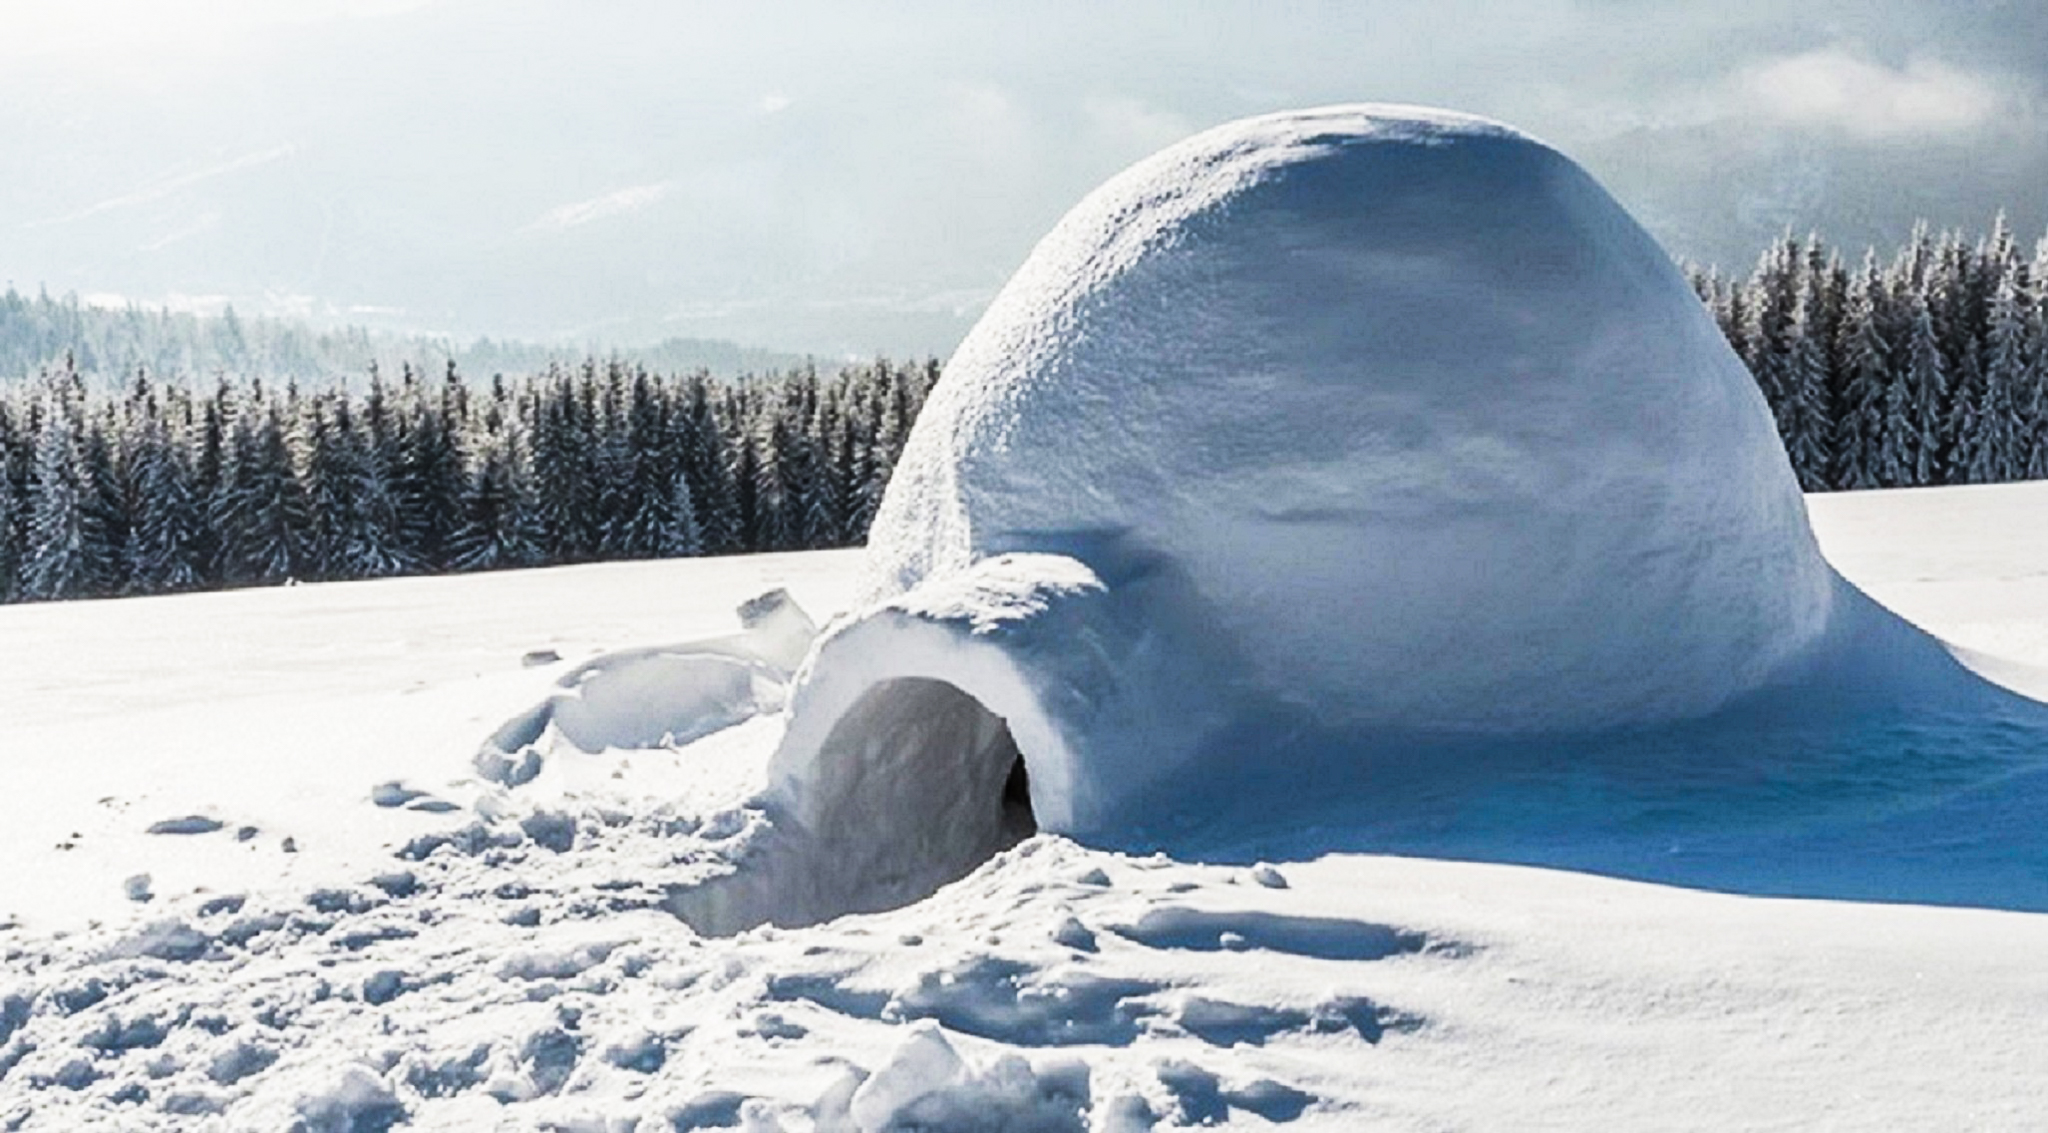 snow igloo in snowy landscape